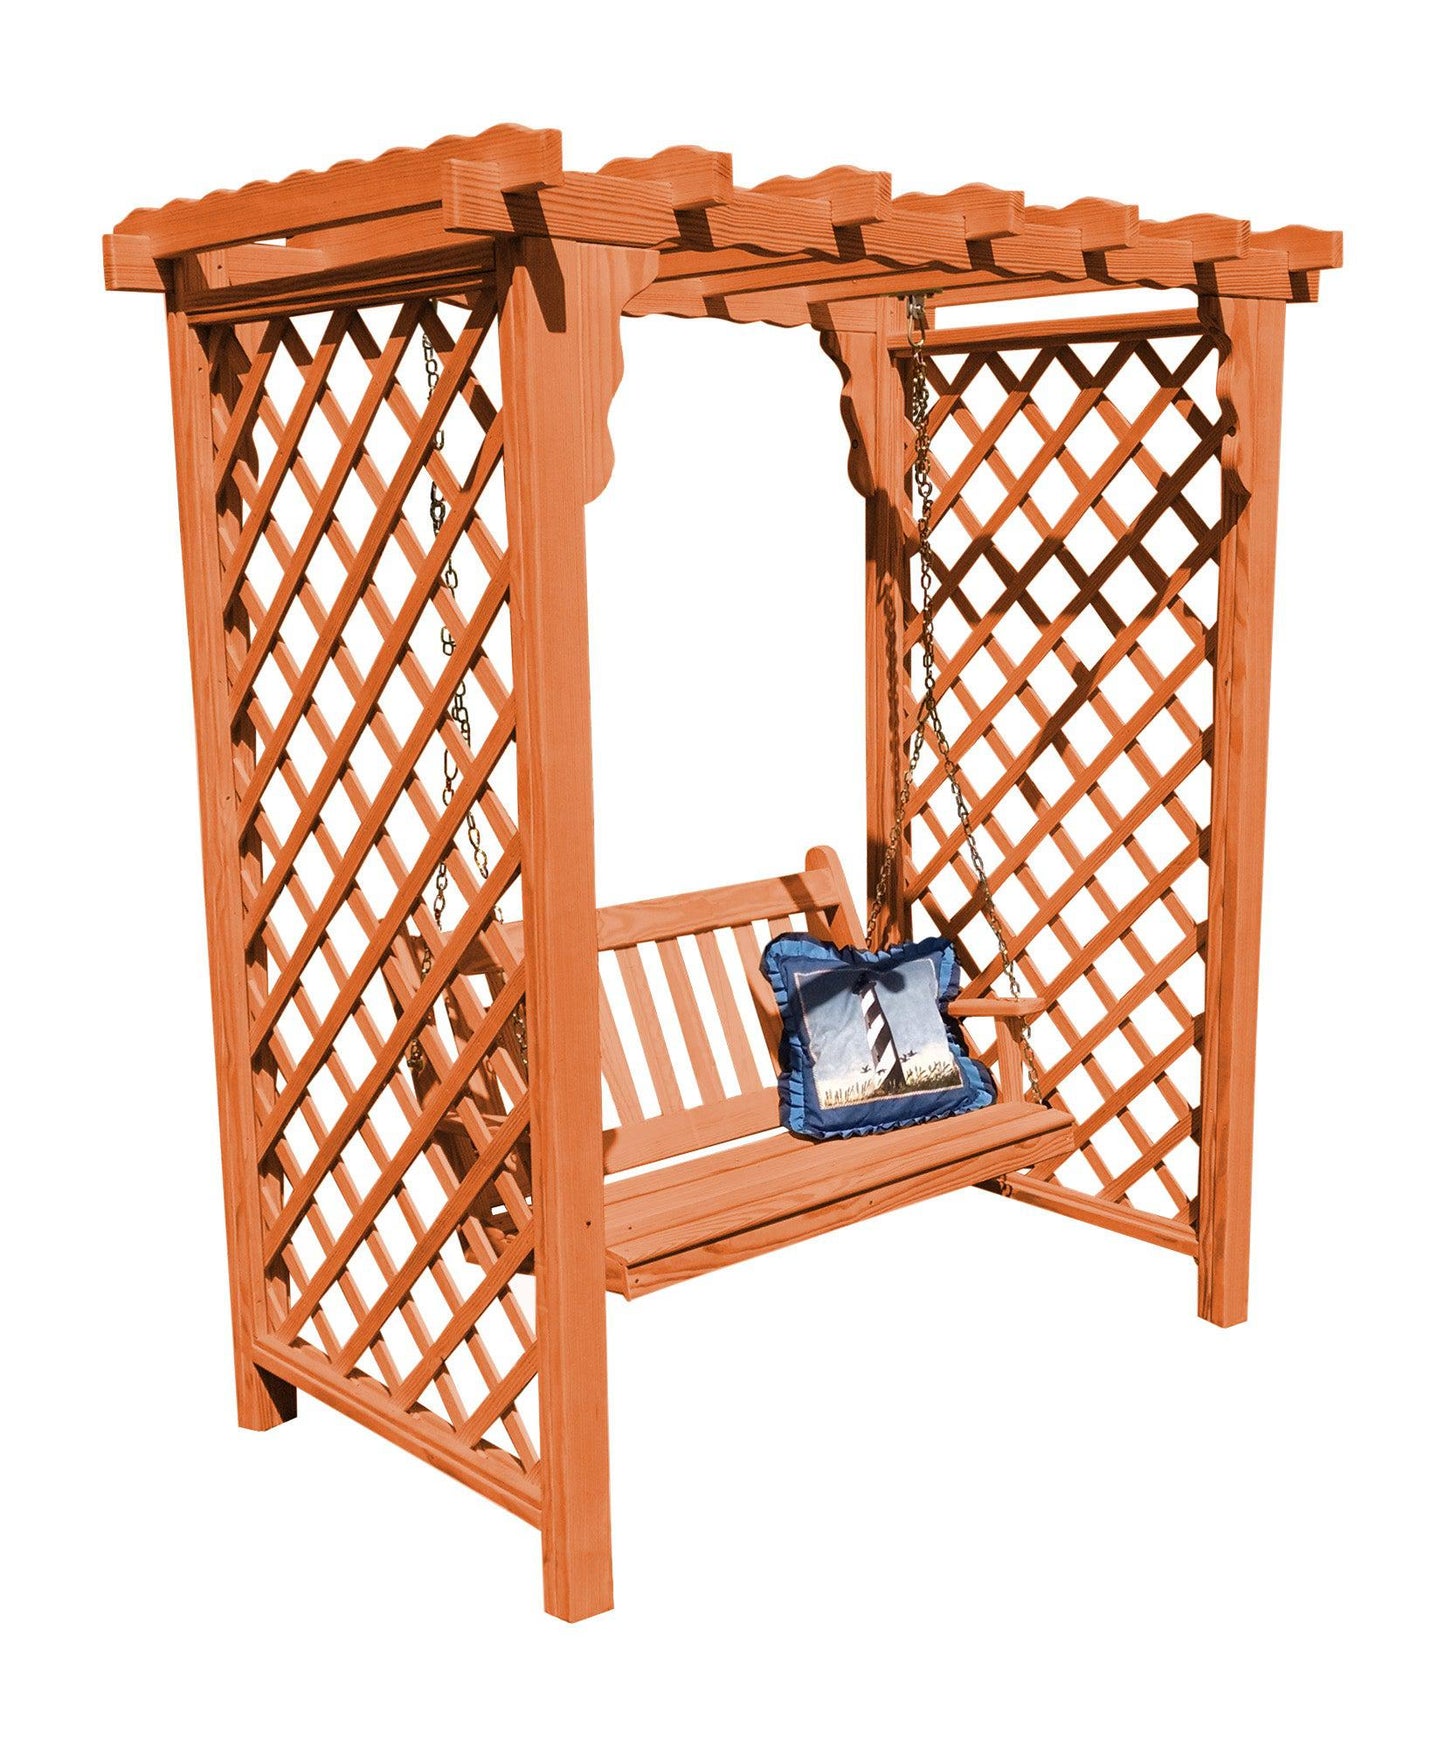 A&L FURNITURE CO. 5' Covington Pressure Treated Pine Arbor & Swing - LEAD TIME TO SHIP 10 BUSINESS DAYS